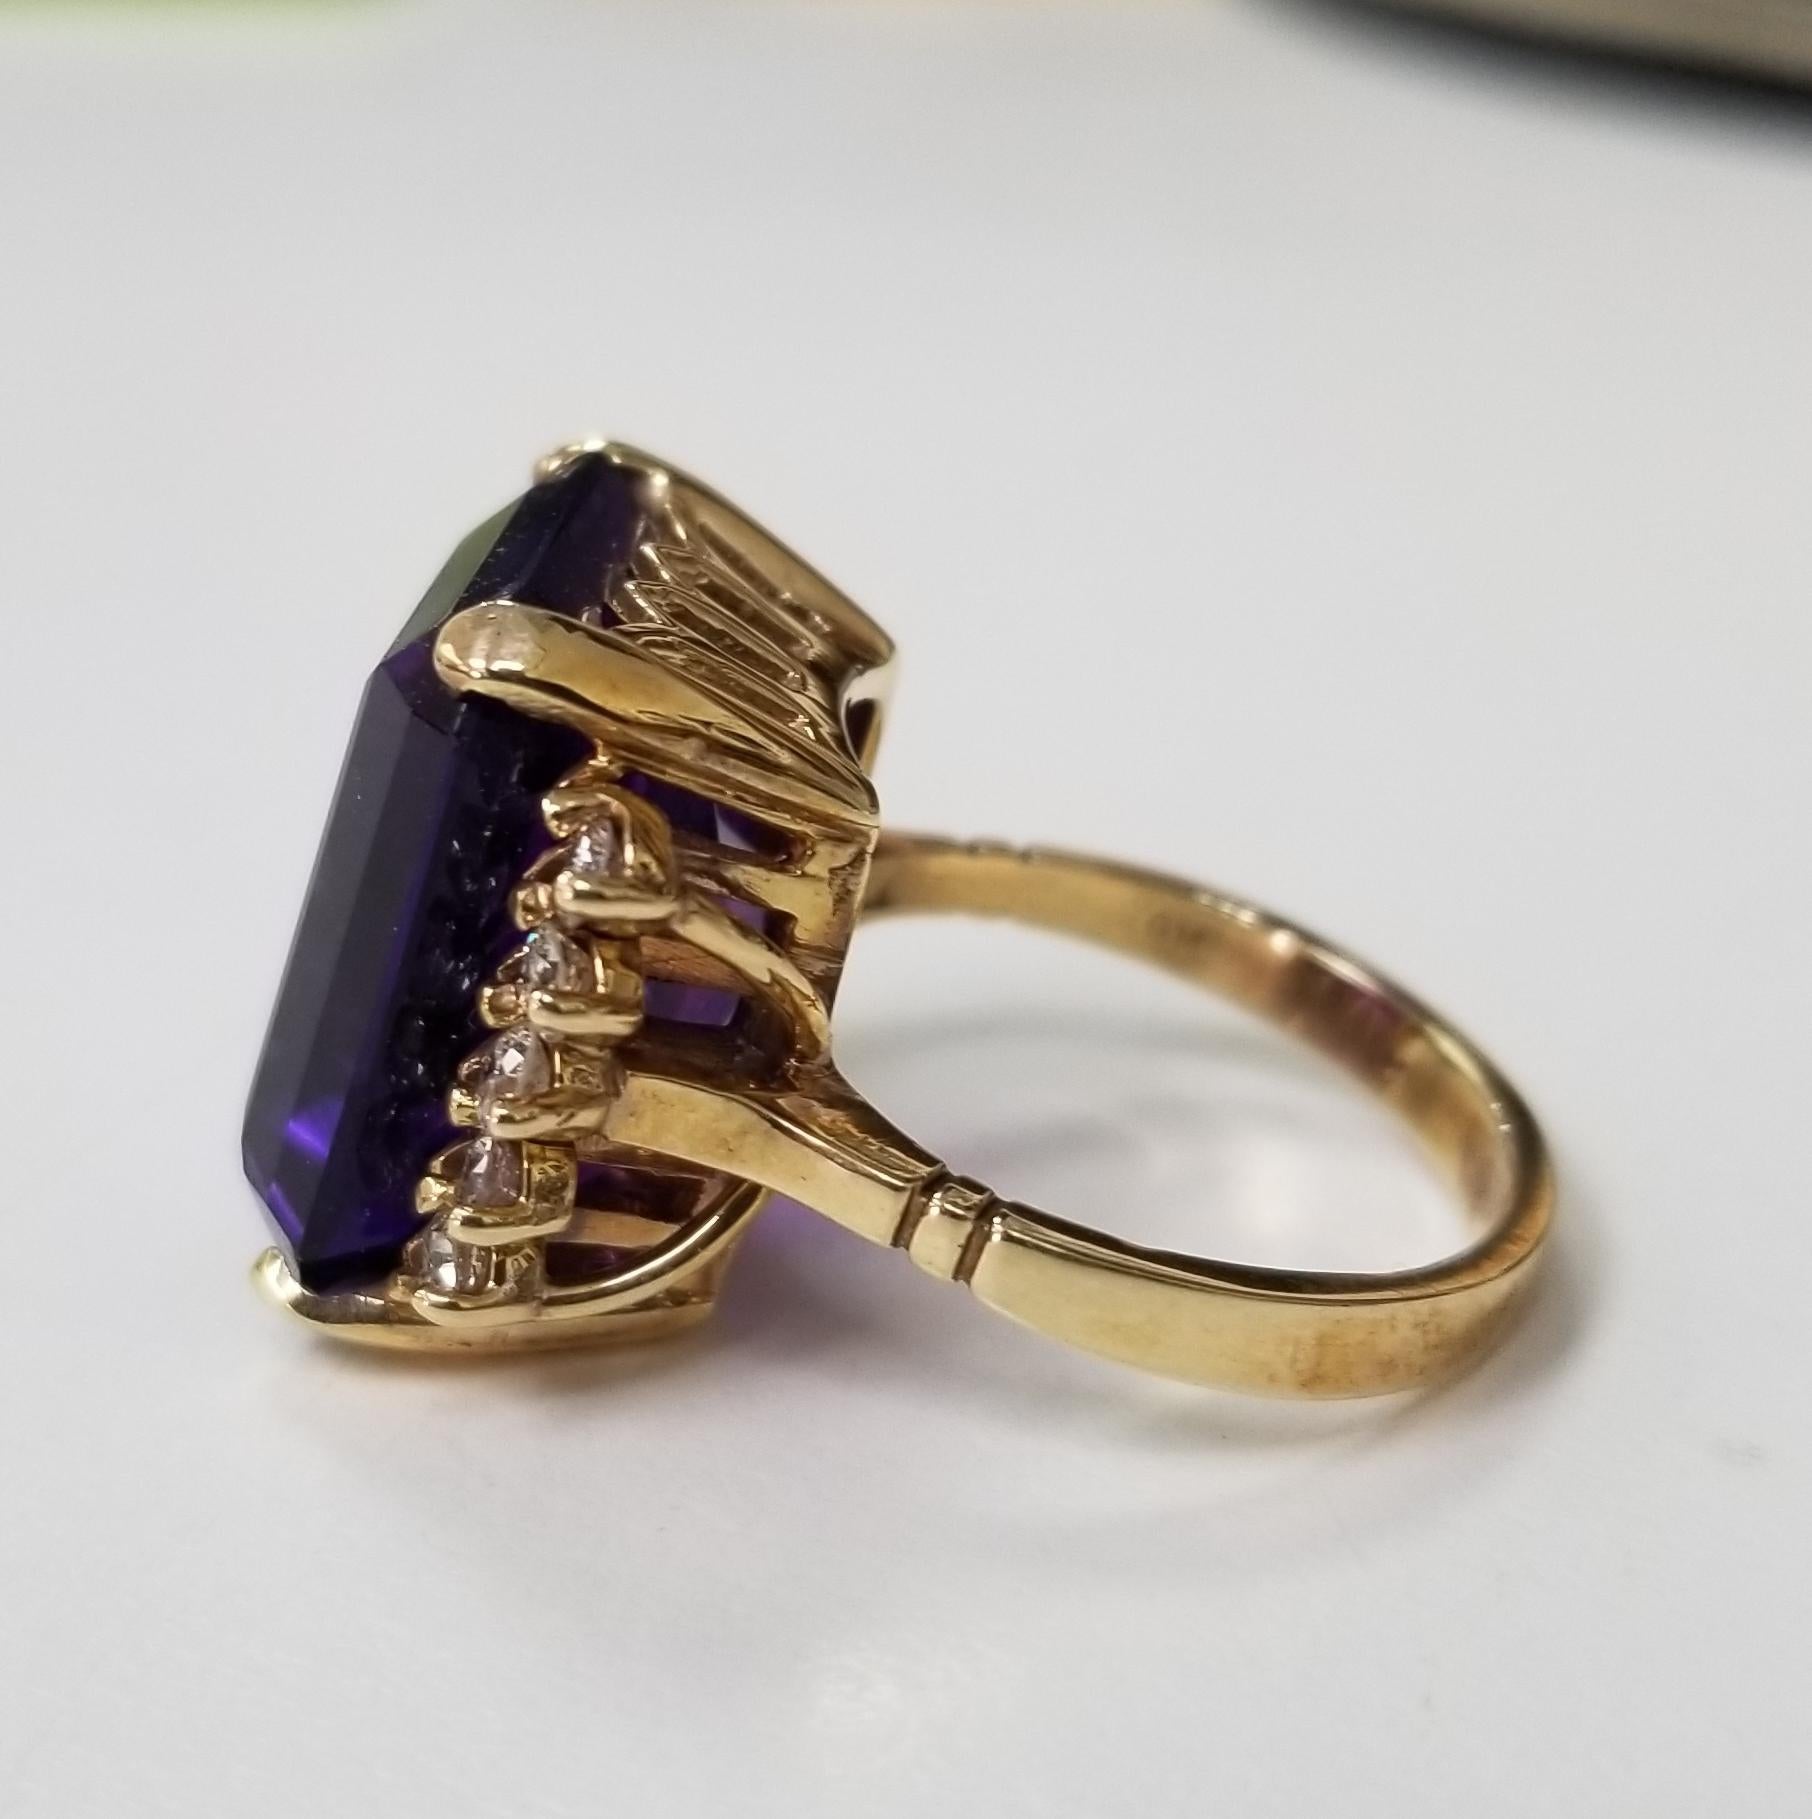 14k yellow gold amethyst and diamond ring, containing 1 emerald cut  weighing 14.98cts. and 10 round diamonds weighing .55pts.  This ring is a size 5.75 but we will size to fit for free.